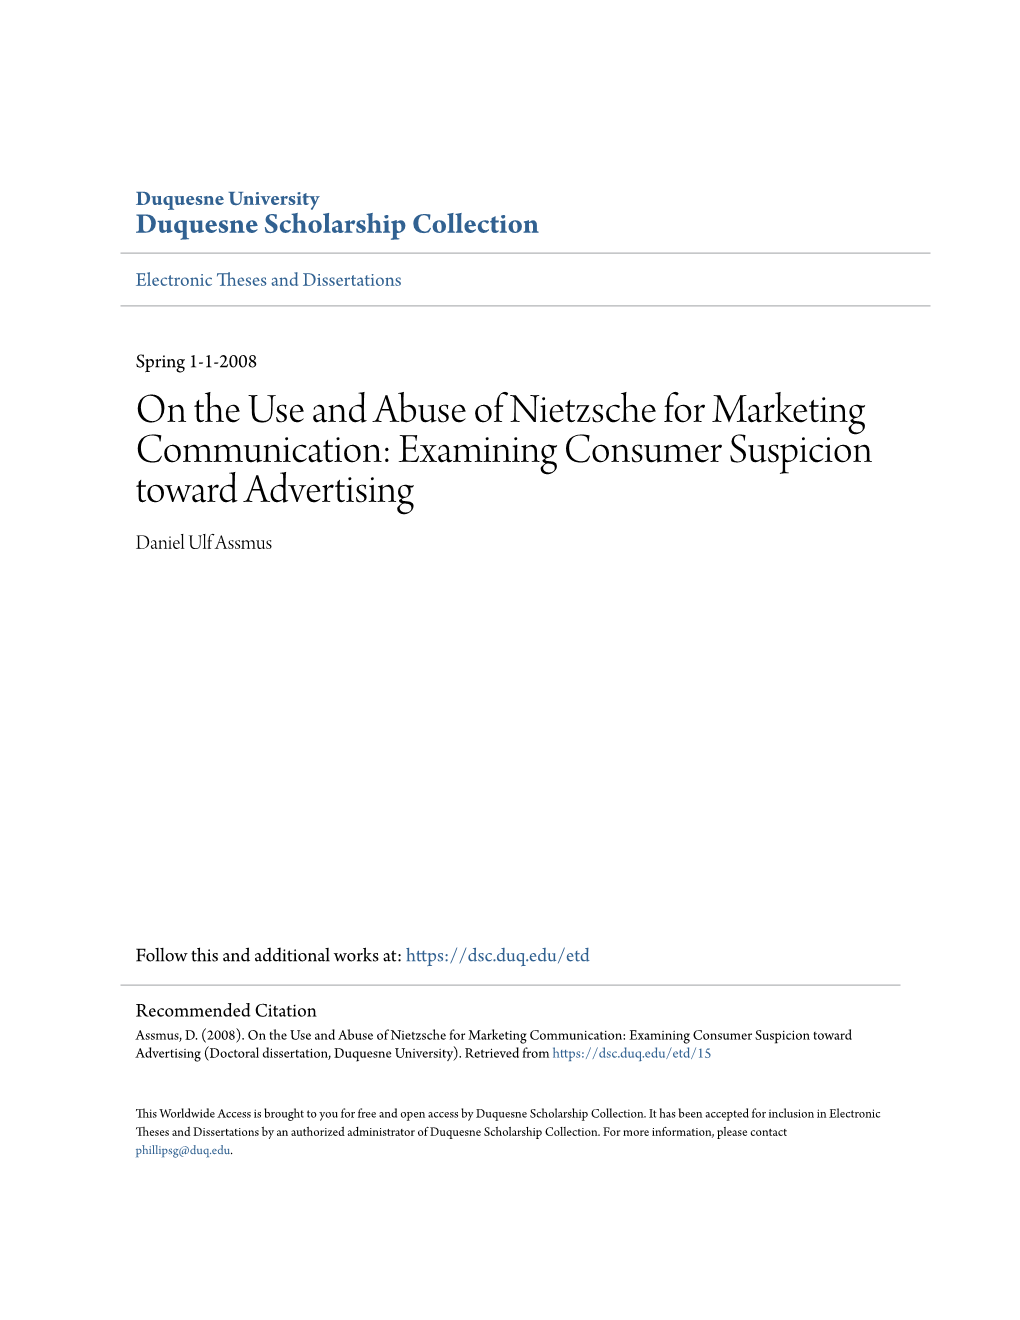 On the Use and Abuse of Nietzsche for Marketing Communication: Examining Consumer Suspicion Toward Advertising Daniel Ulf Assmus